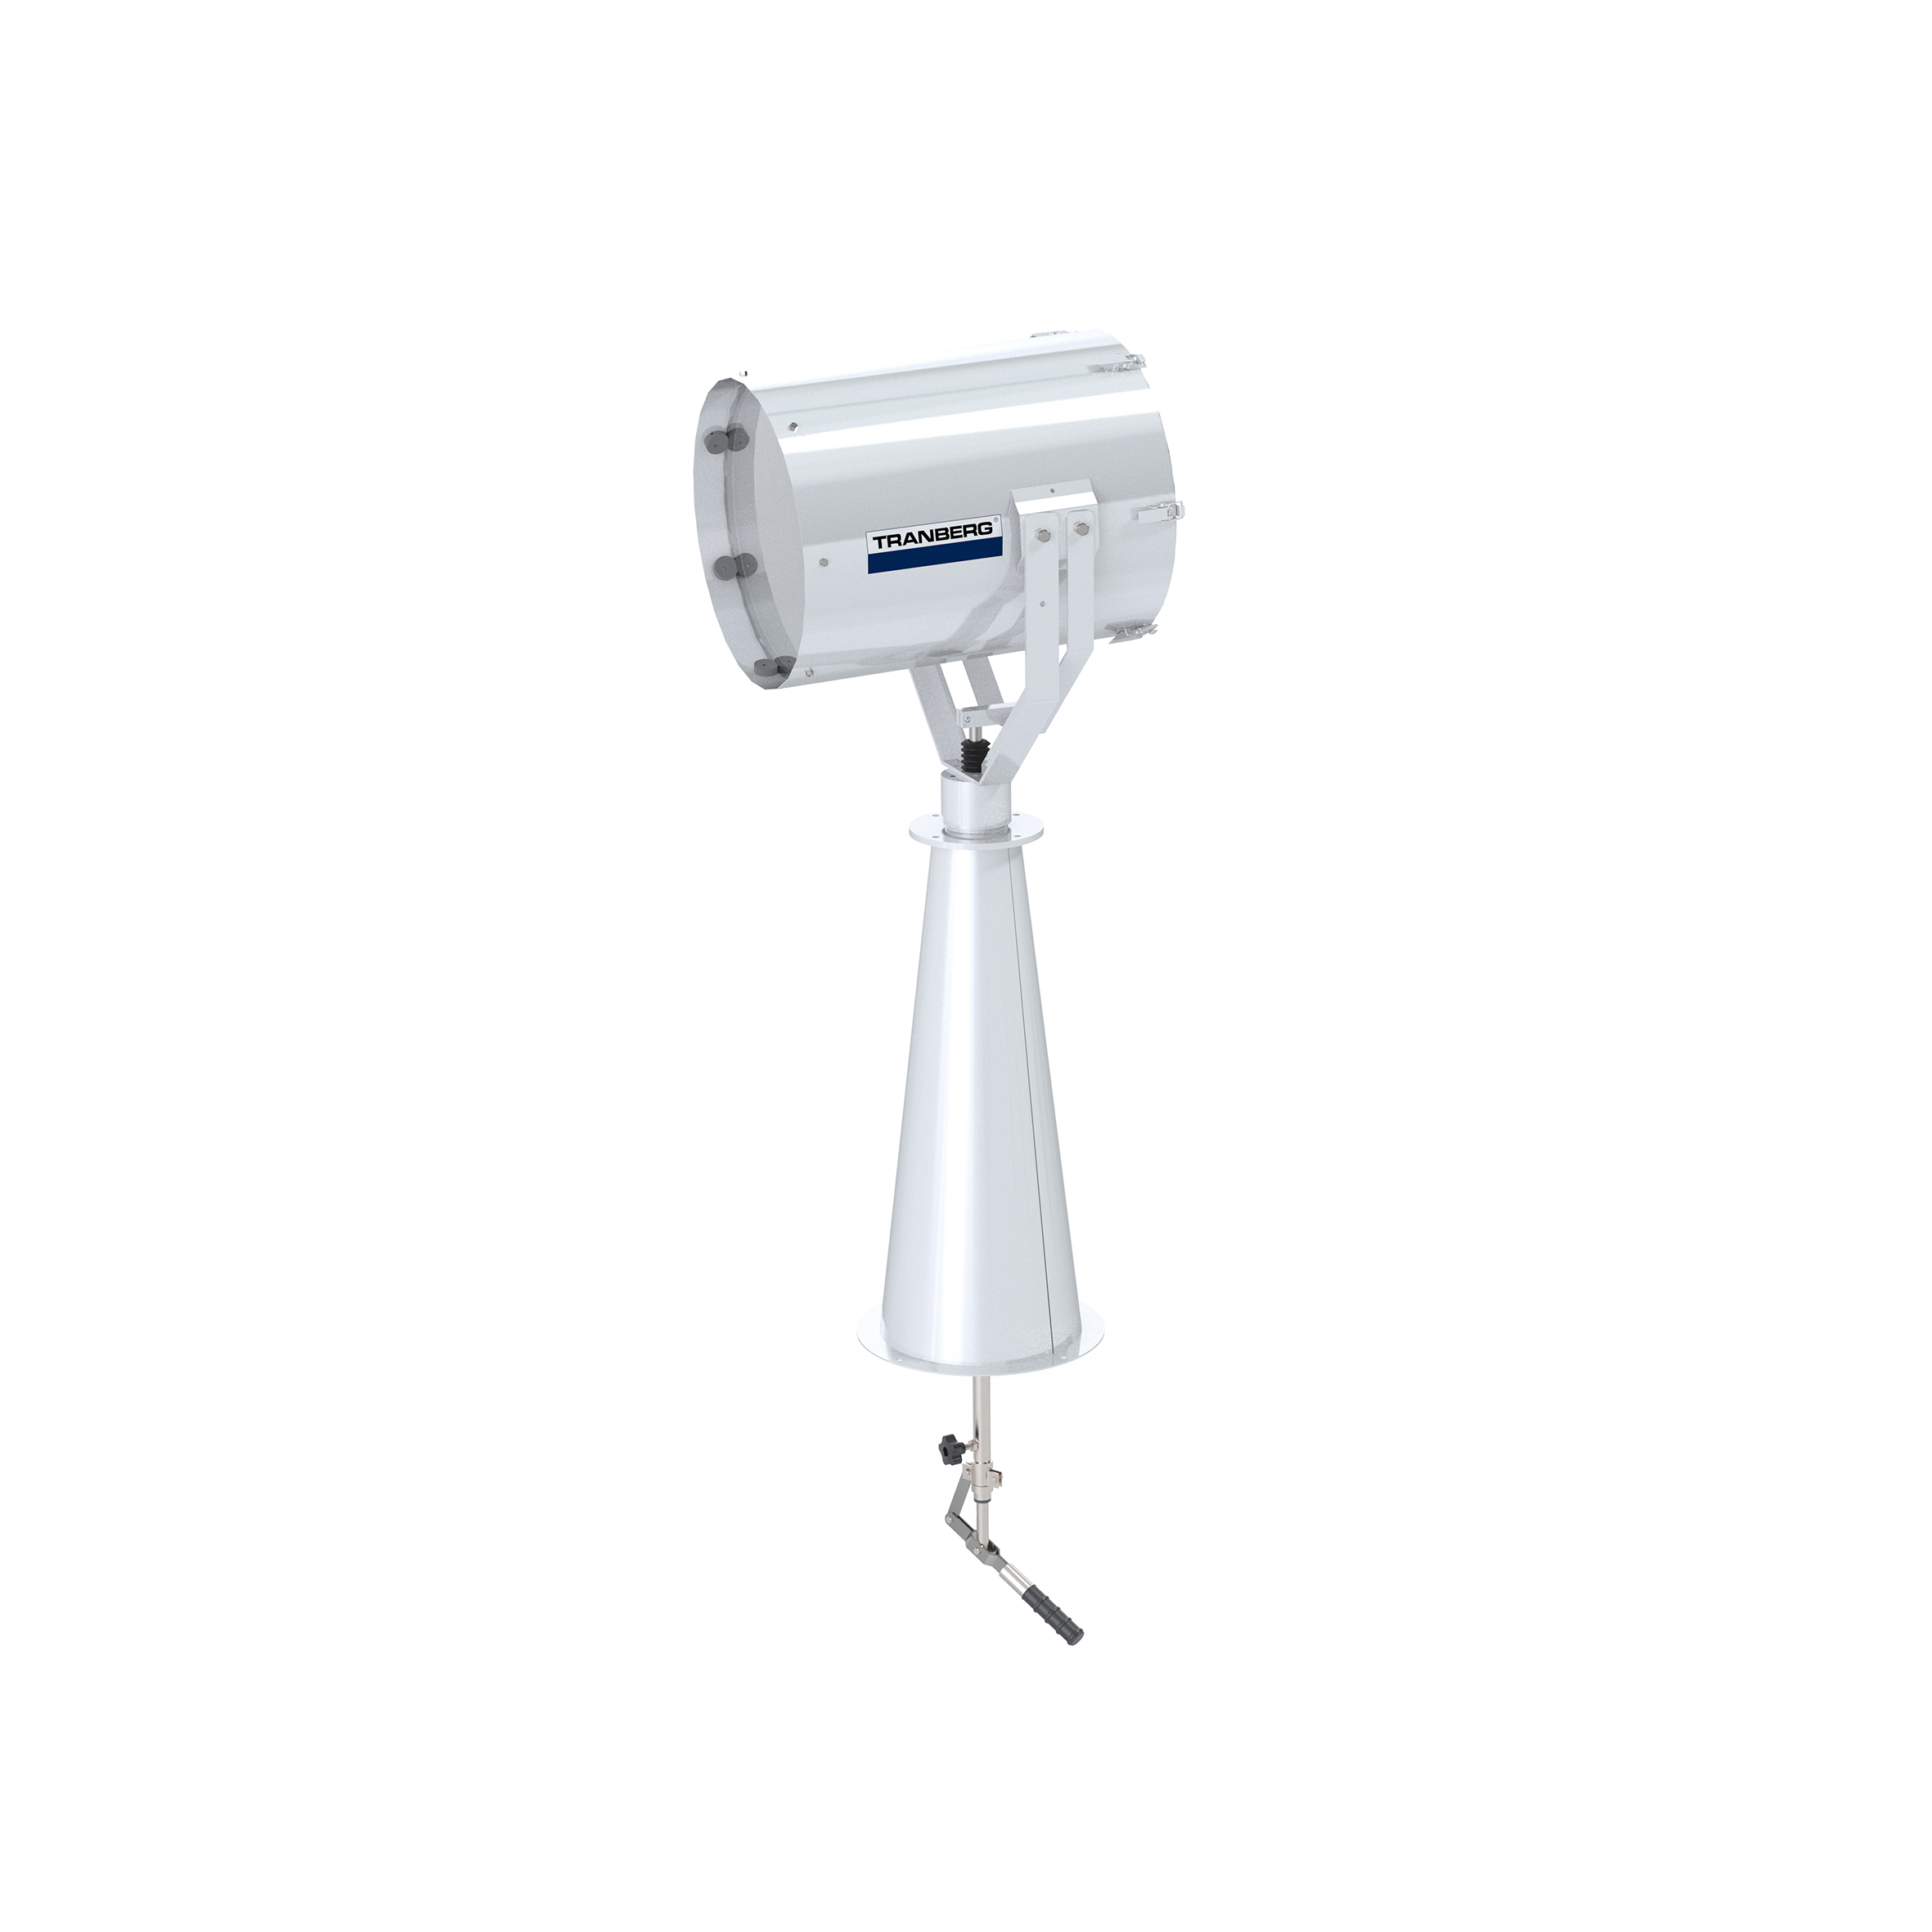 TEF 2630 Searchlight: Halogen 250W bulb incl, 24V, Bridge Controlled, Stainless Steel, W/300 mm pede